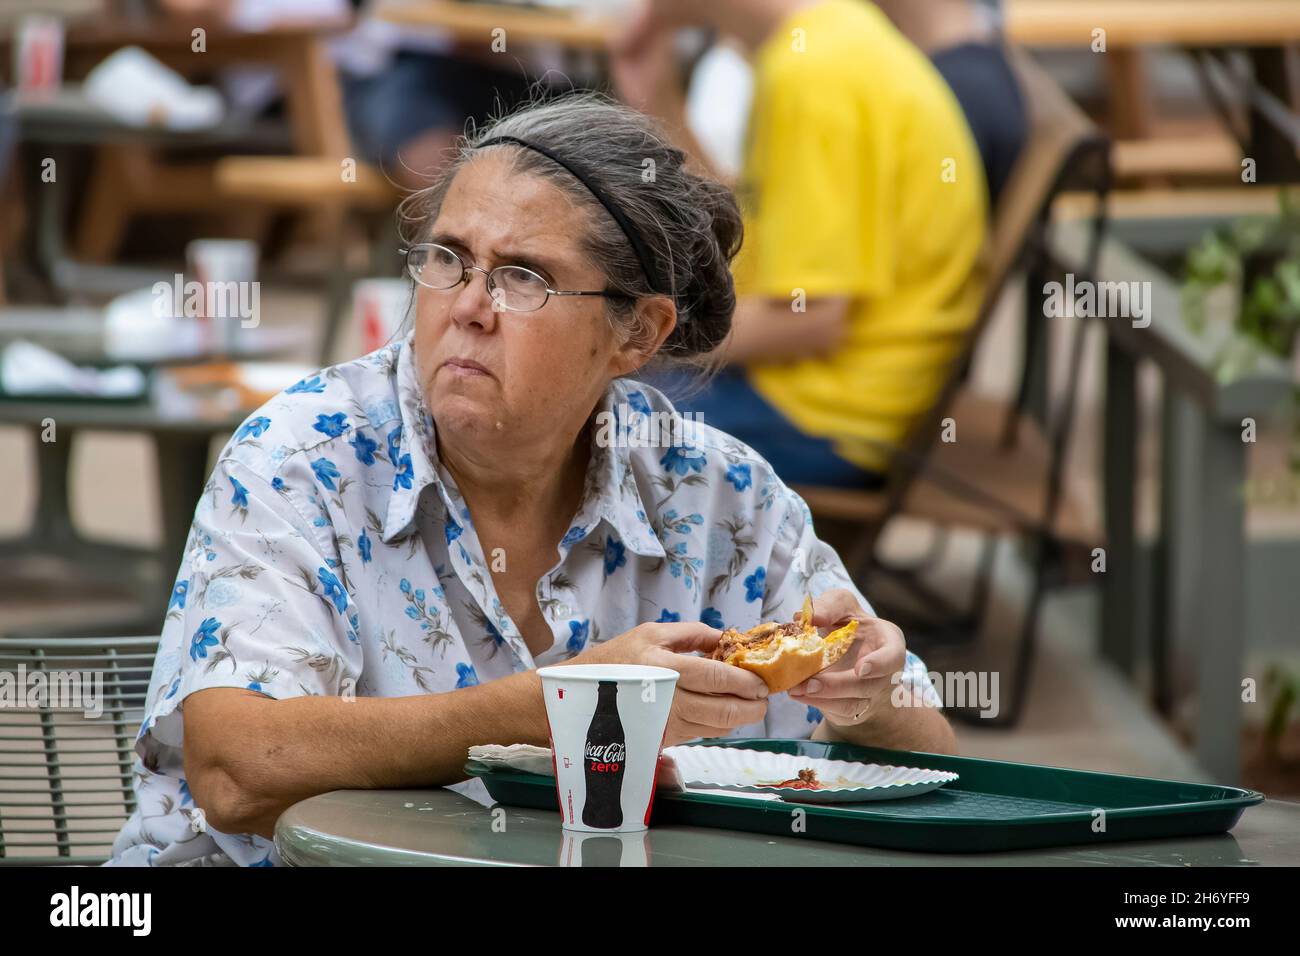 Tulsa USA 9 - 8 2018  Older woman eating a hamburger at an outside table looking up with an unhappy expression on her face Stock Photo